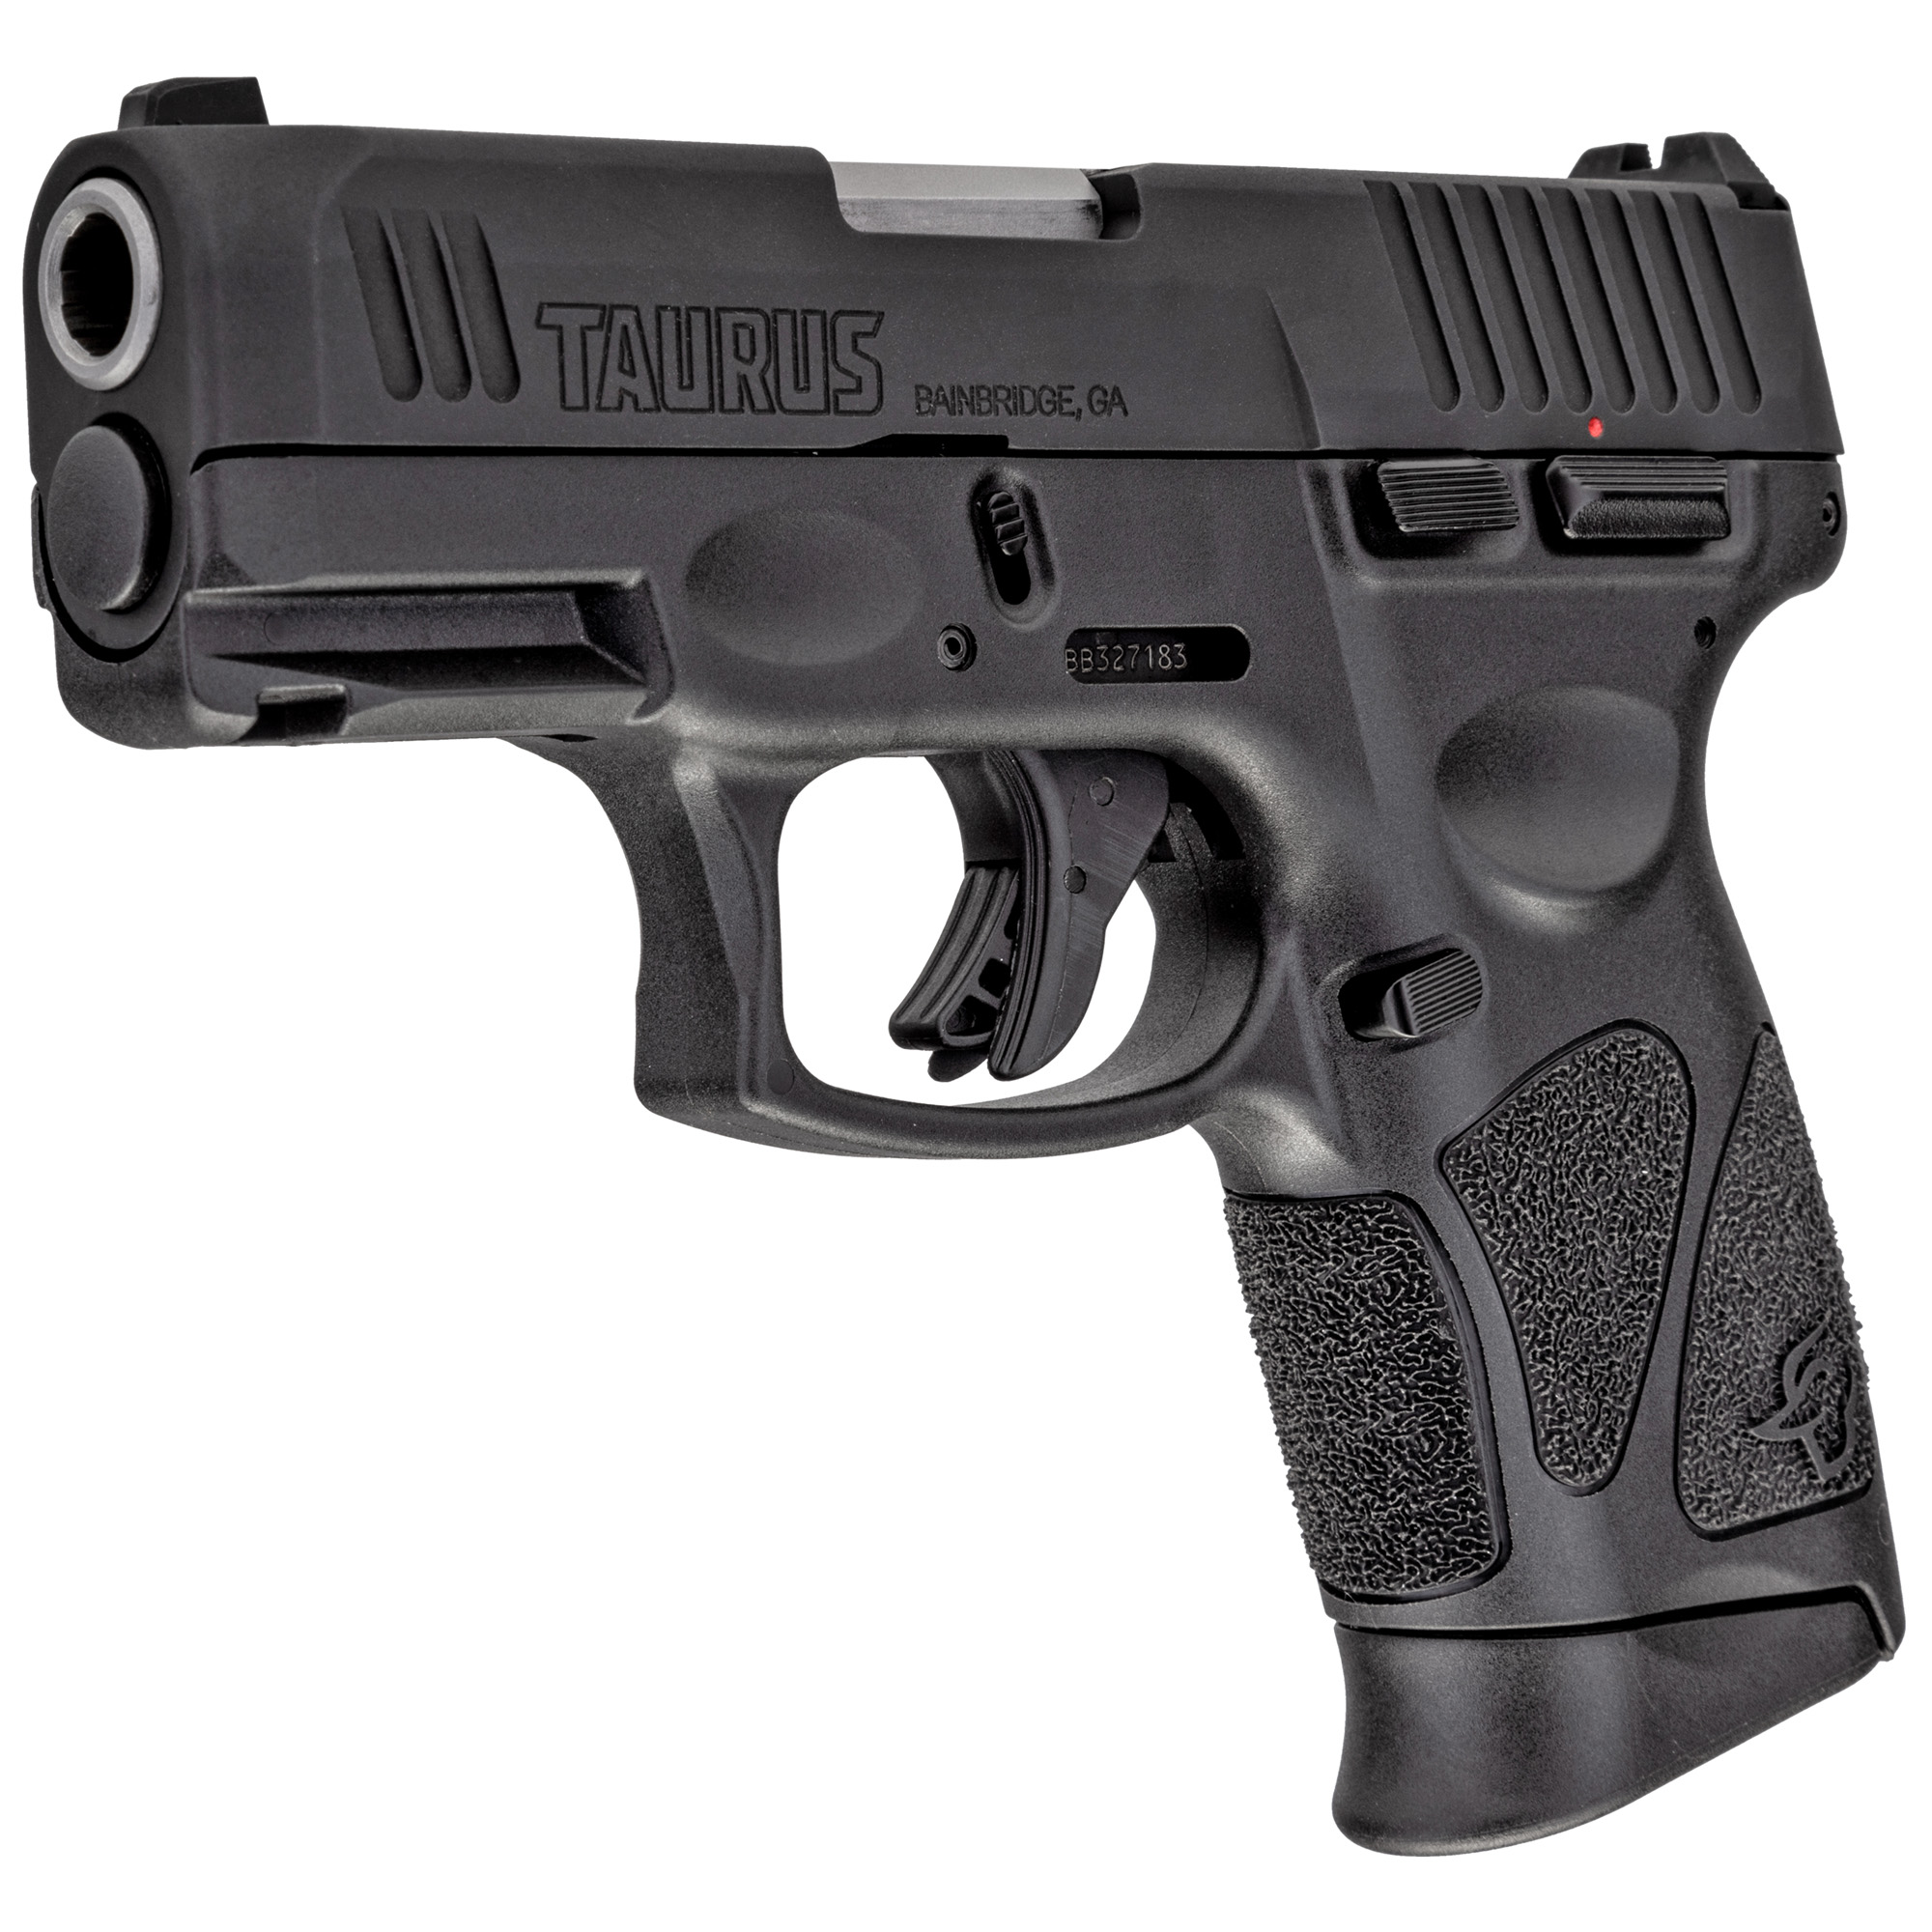 Taurus, G3C, Striker Fired, Semi-automatic, Polymer Frame Pistol, Compact, 3.26" Barrel, Matte Finish, Black, Fixed Front Sight With Drift Adjustable Rear Sight, Manual Thumb Safety, 12 Rounds